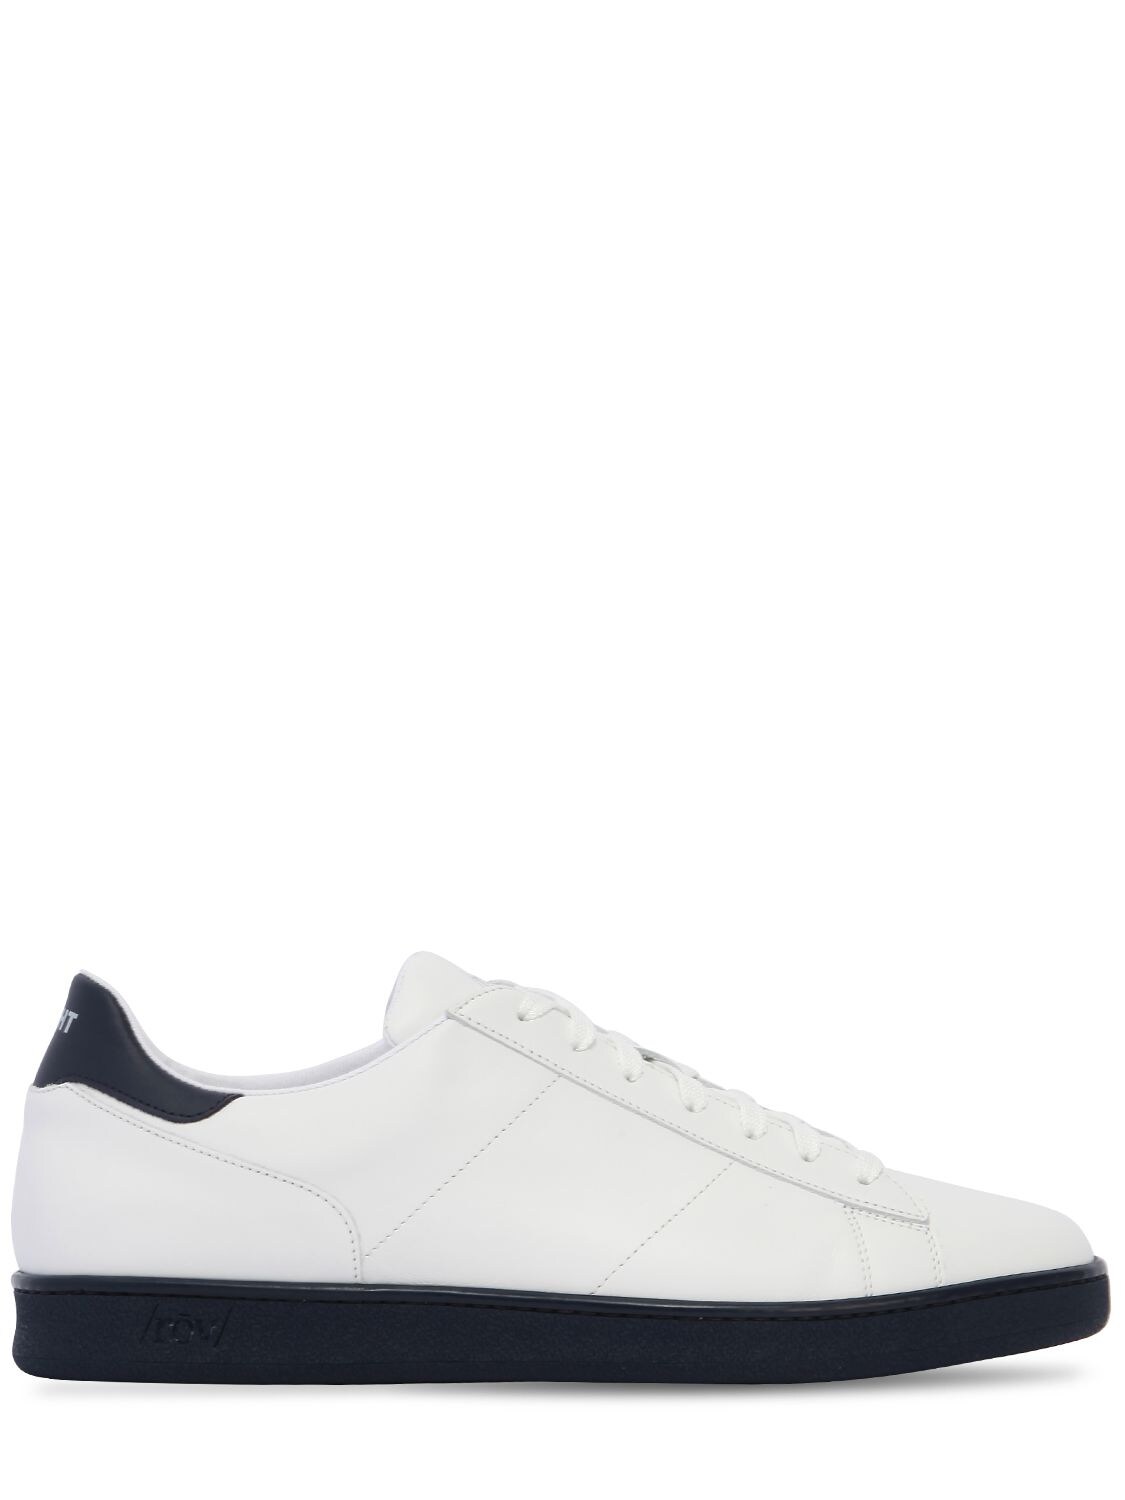 Rov Leather Colored Sole Sneakers In White/navy